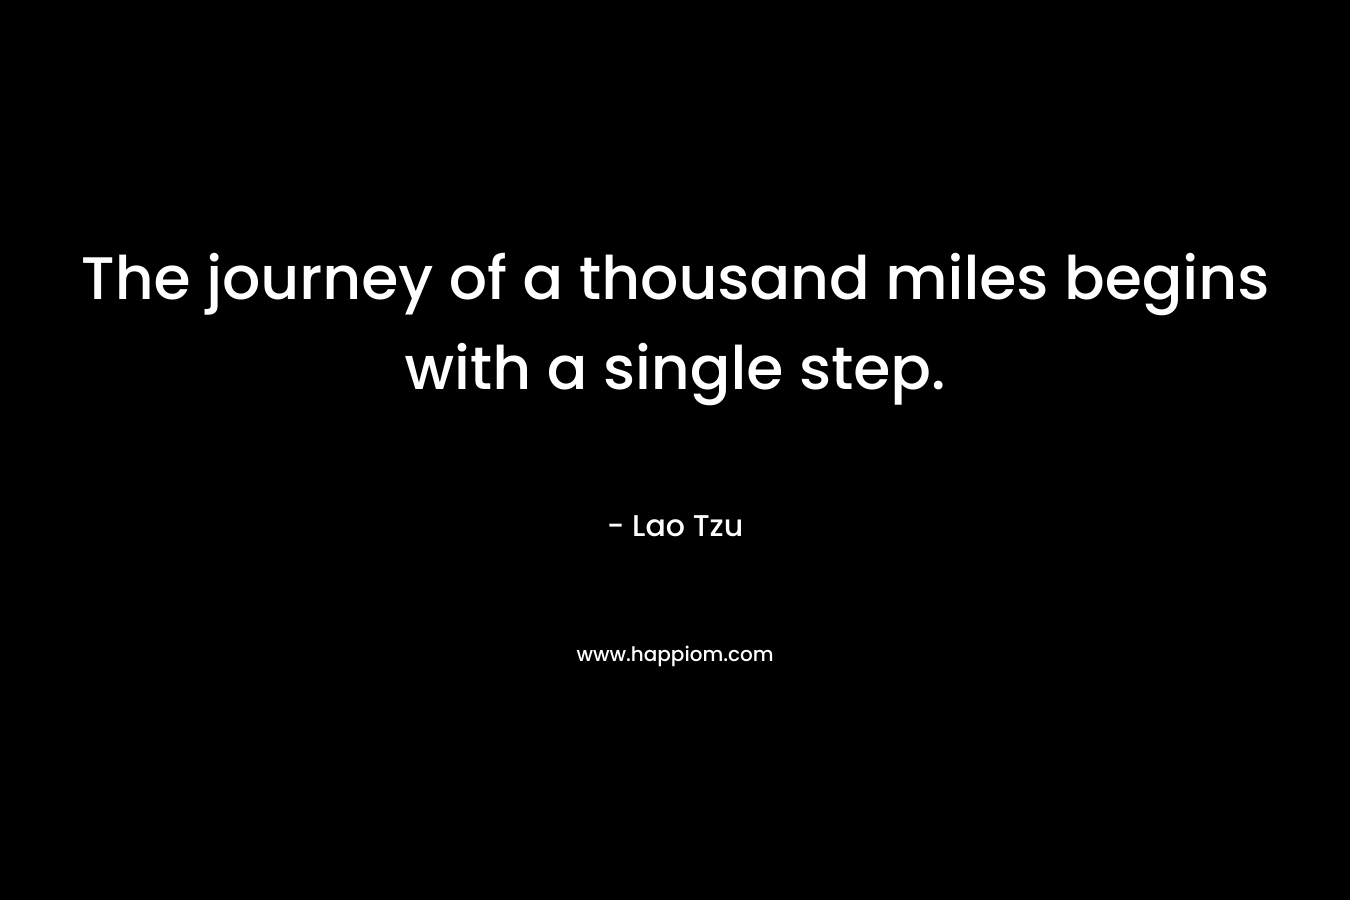 The journey of a thousand miles begins with a single step. – Lao Tzu